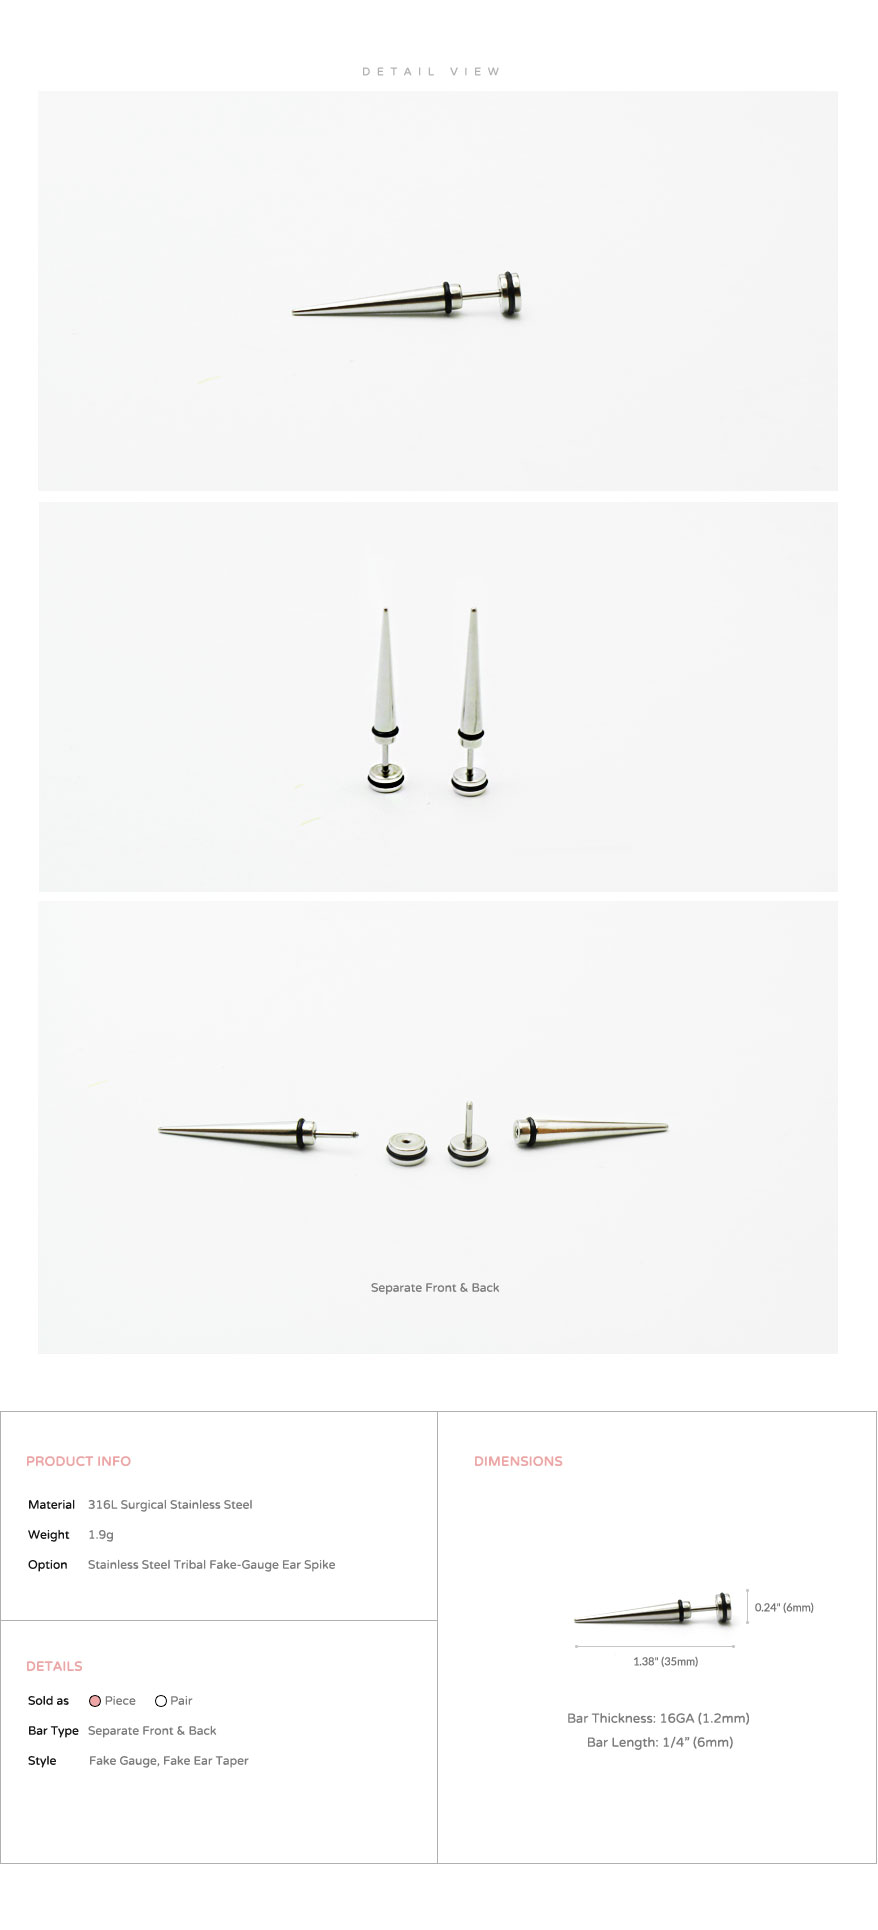 ear_studs_piercing_Cartilage_earrings_16g_316l_Surgical_Stainless_Steel_korean_asian_style_jewelry_fake_Gauge_taper_3